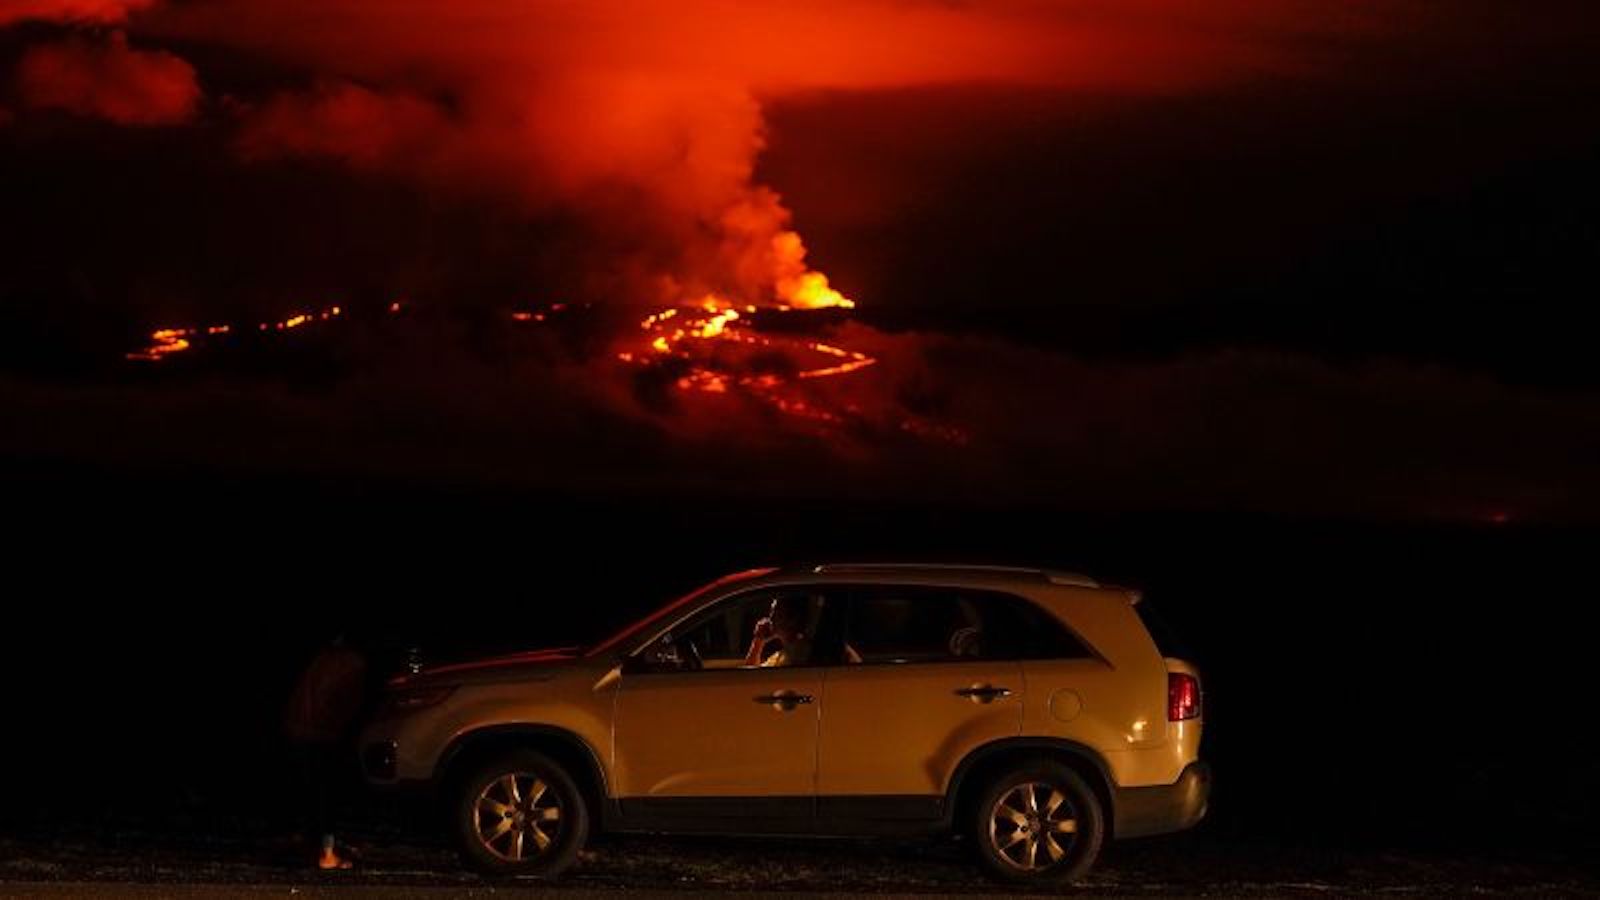 Authorities develop a safe way to see the Mauna Loa volcano